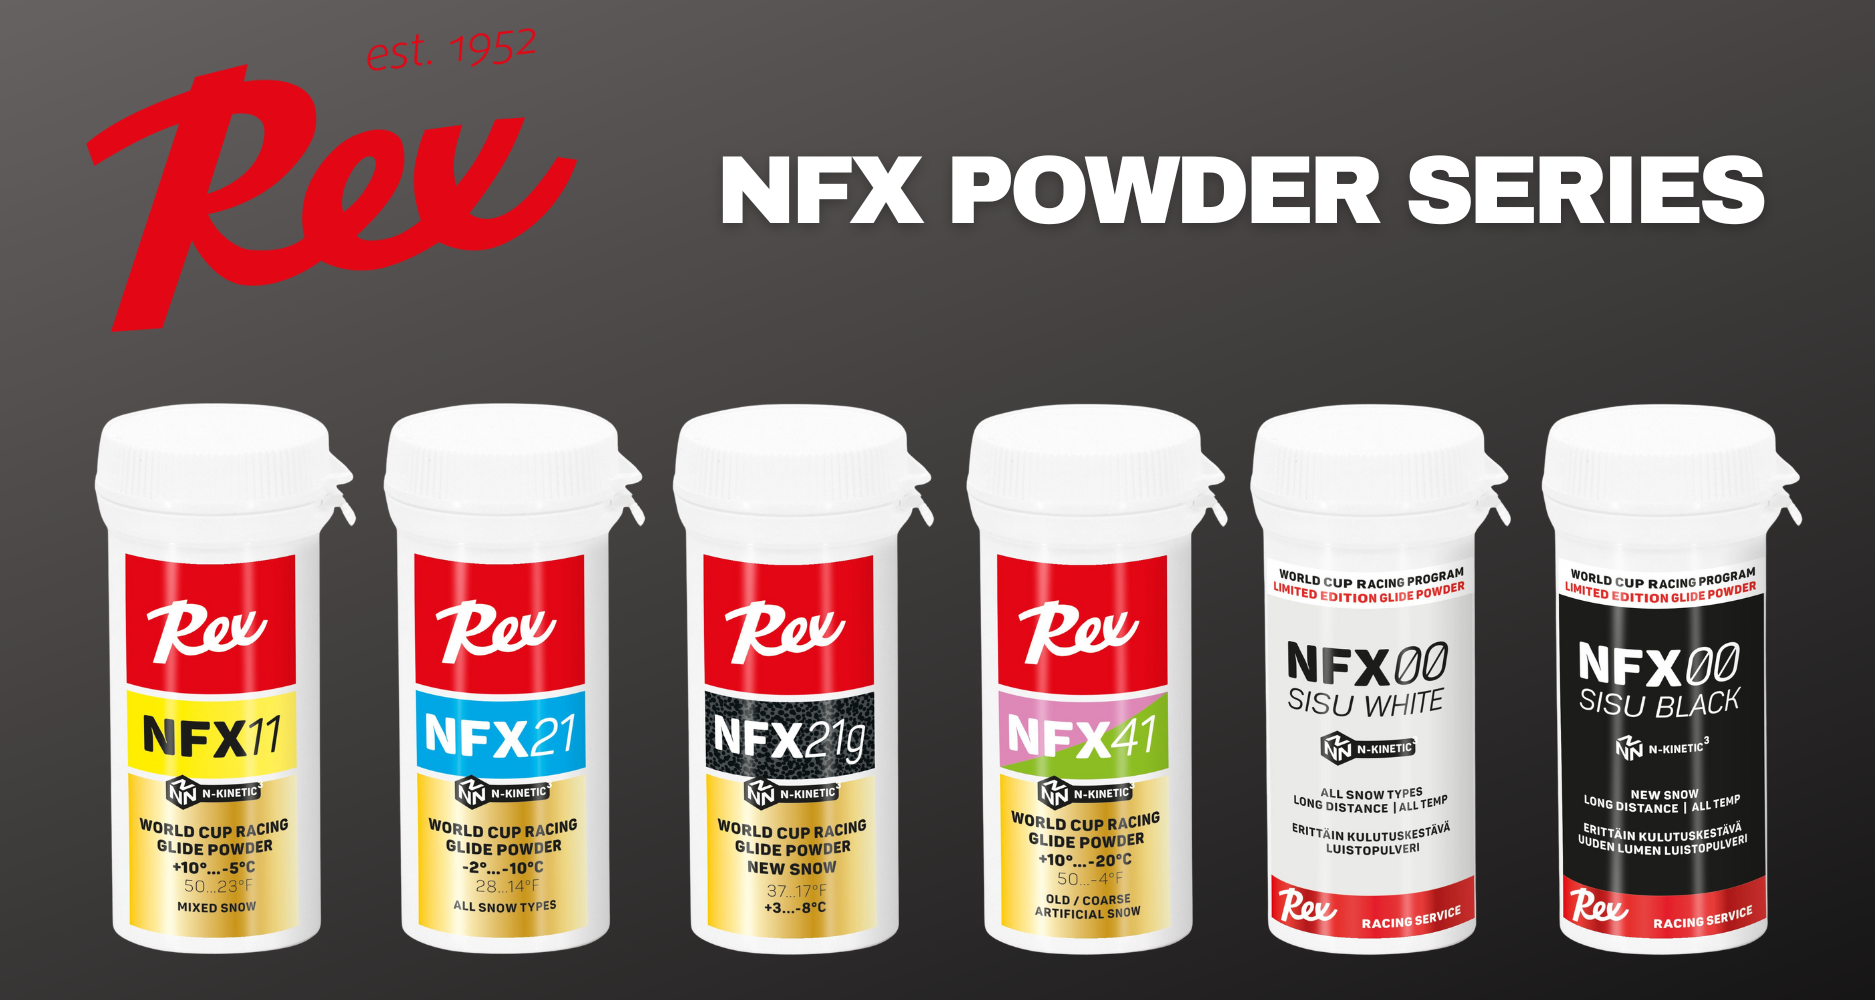 Exciting New NFX Powder Series Release from Rex